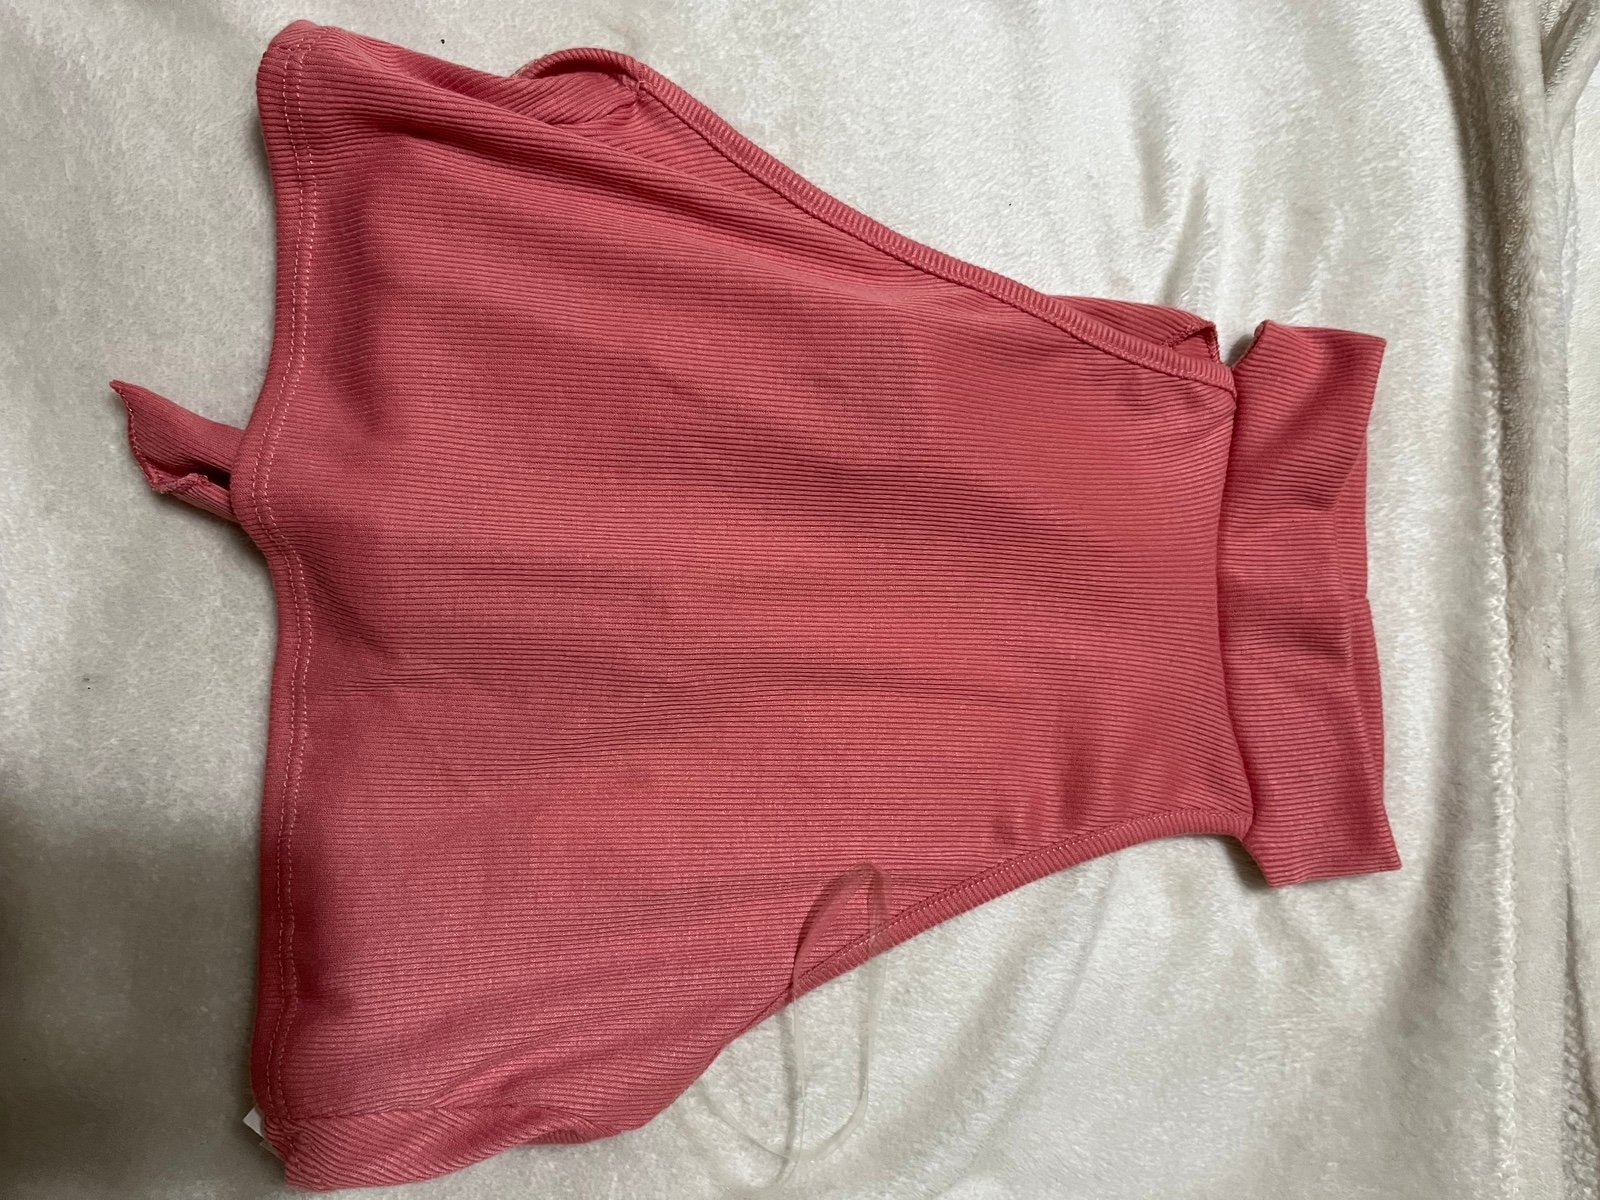 large selection Pink Halter Top LhRDoWMV7 well sale